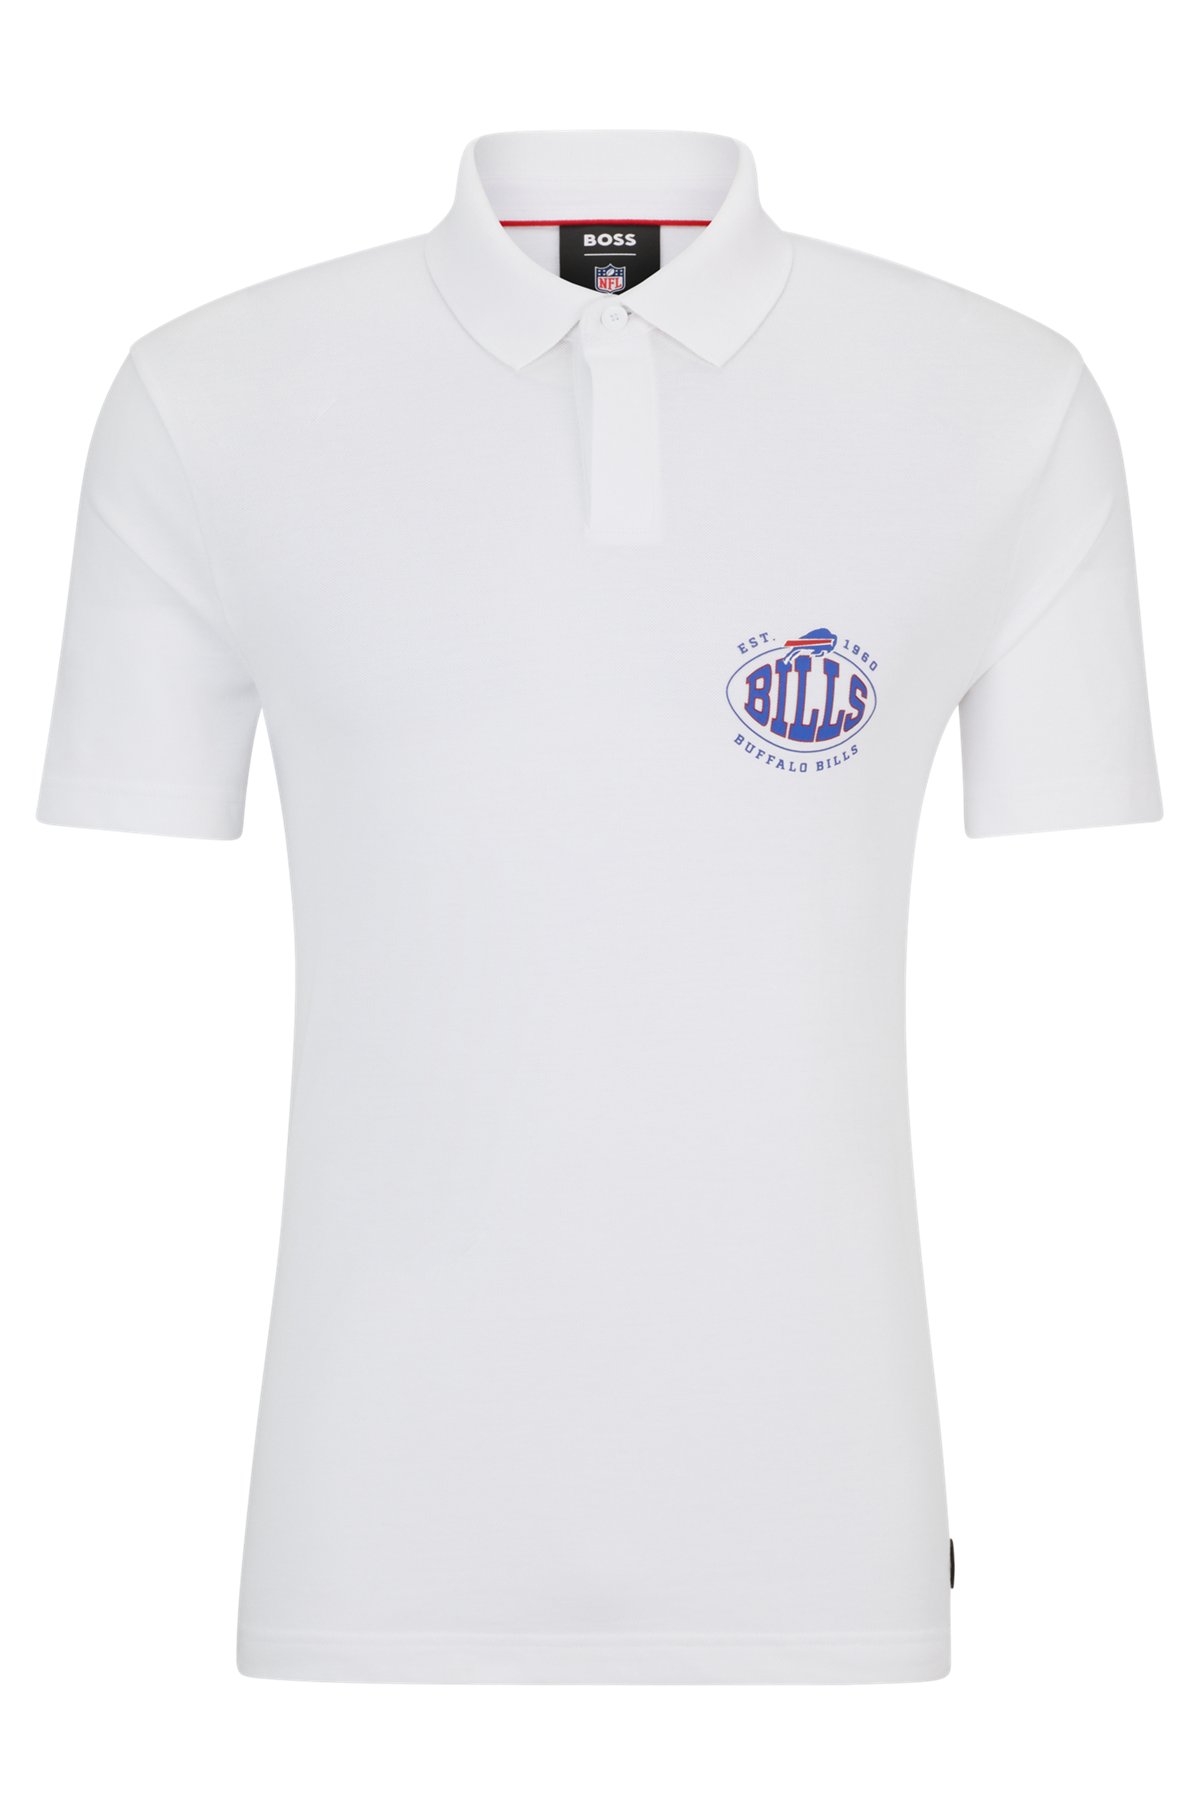 BOSS X NFL Cotton-piqué Polo Shirt With Collaborative, 41% OFF